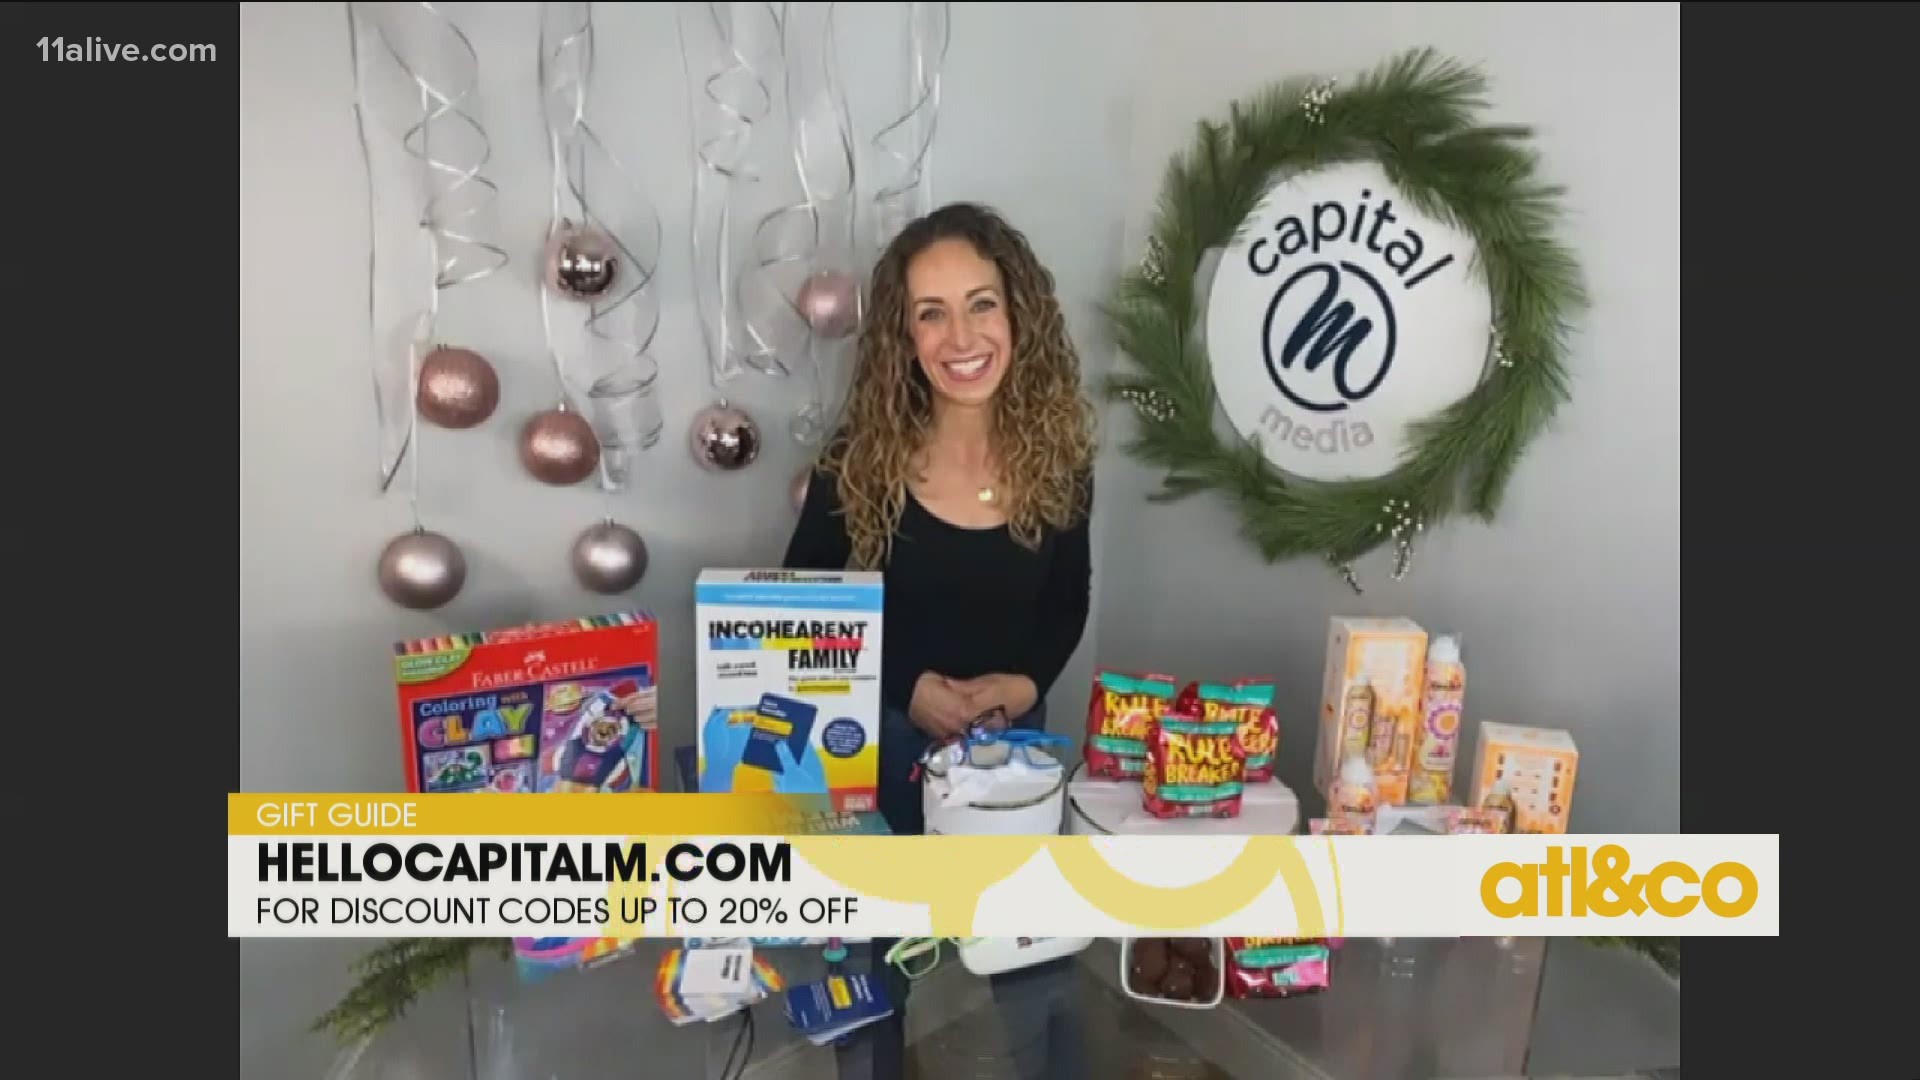 Parenting contributor Carly Dorogi shares unique gift ideas the kids will love long after Christmas Day!